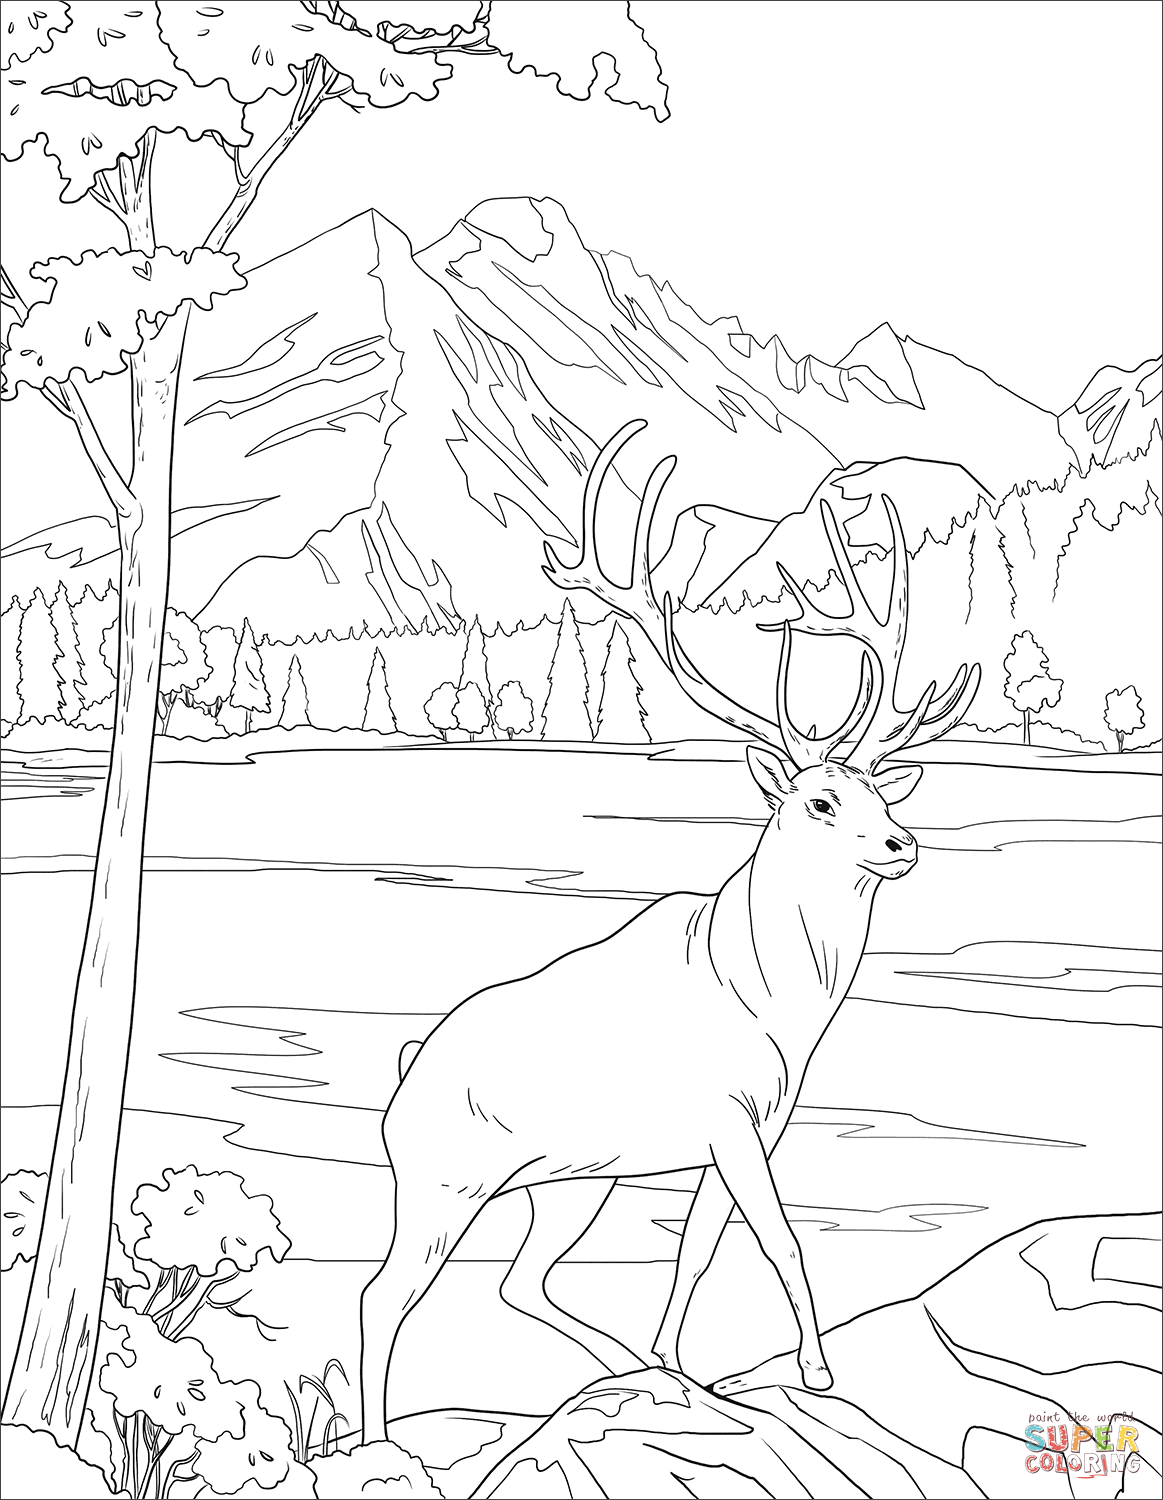 Rocky mountain national park coloring page free printable coloring pages